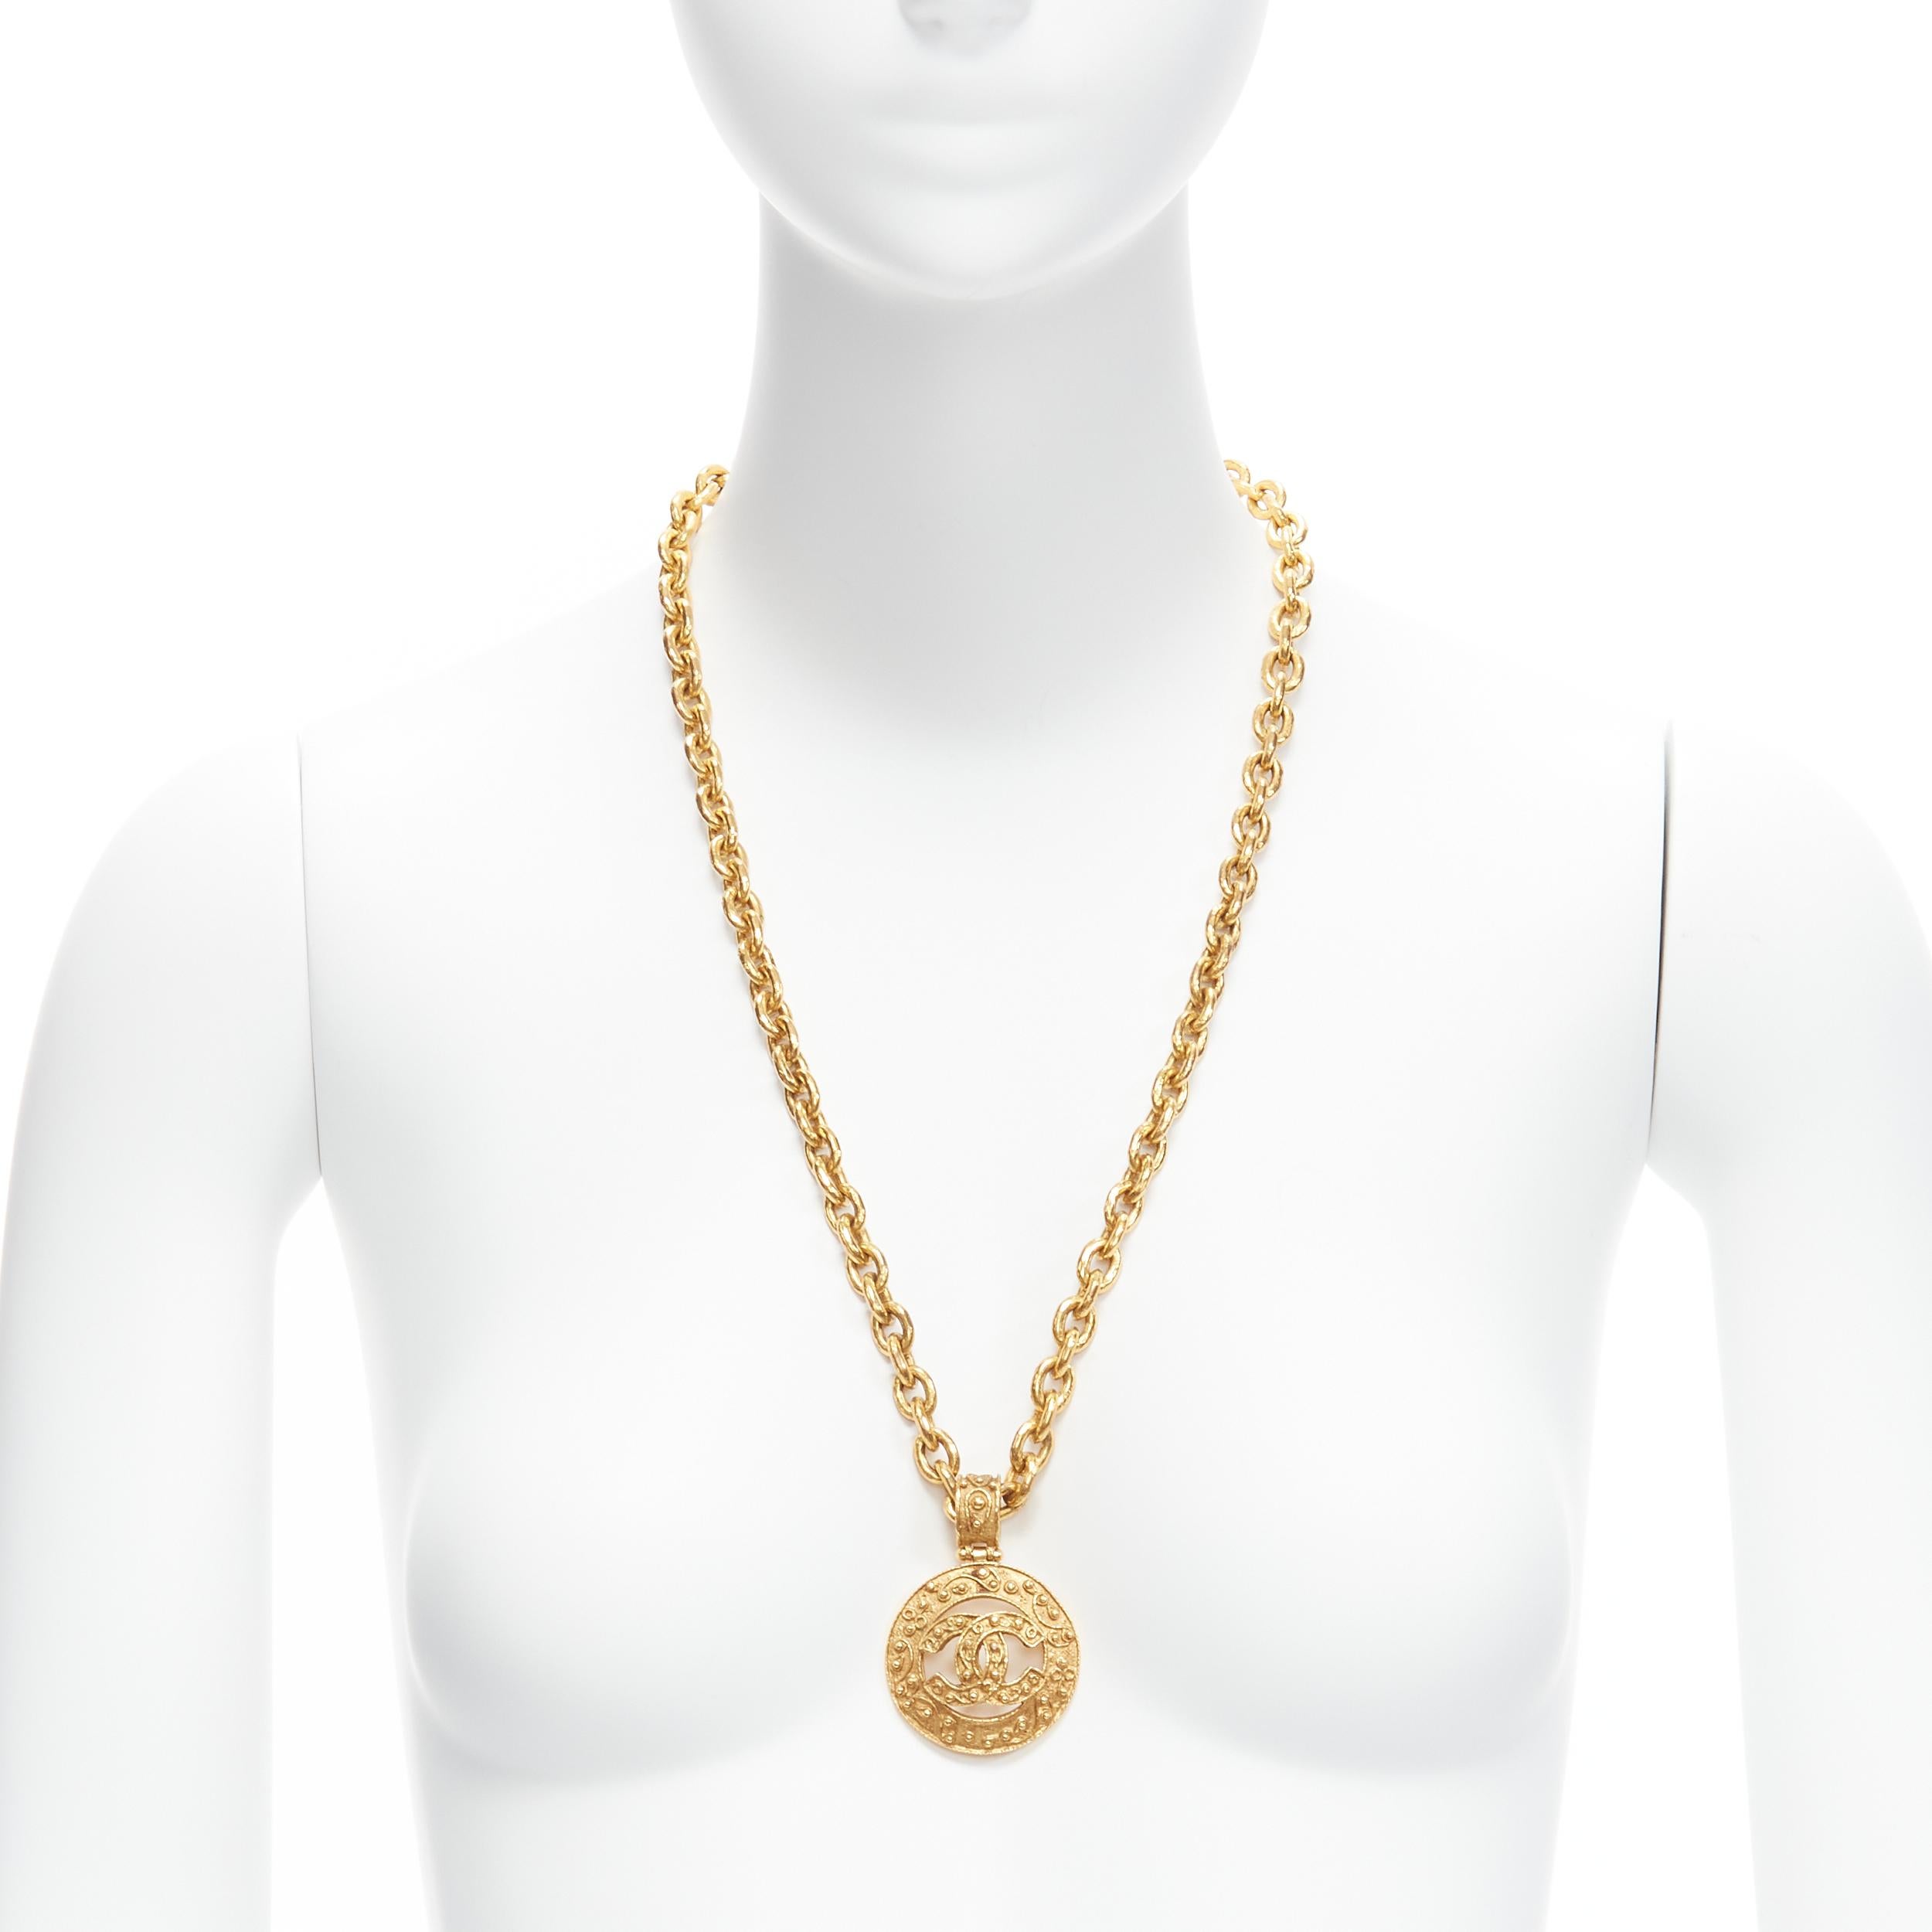 CHANEL 94A Vintage gold tone interlock CC logo coin pendant chain necklace
Reference: TGAS/D00163
Brand: Chanel
Designer: Karl Lagerfeld
Collection: 94A
Material: Metal
Color: Gold
Pattern: Solid
Closure: Lobster Clasp
Made in: